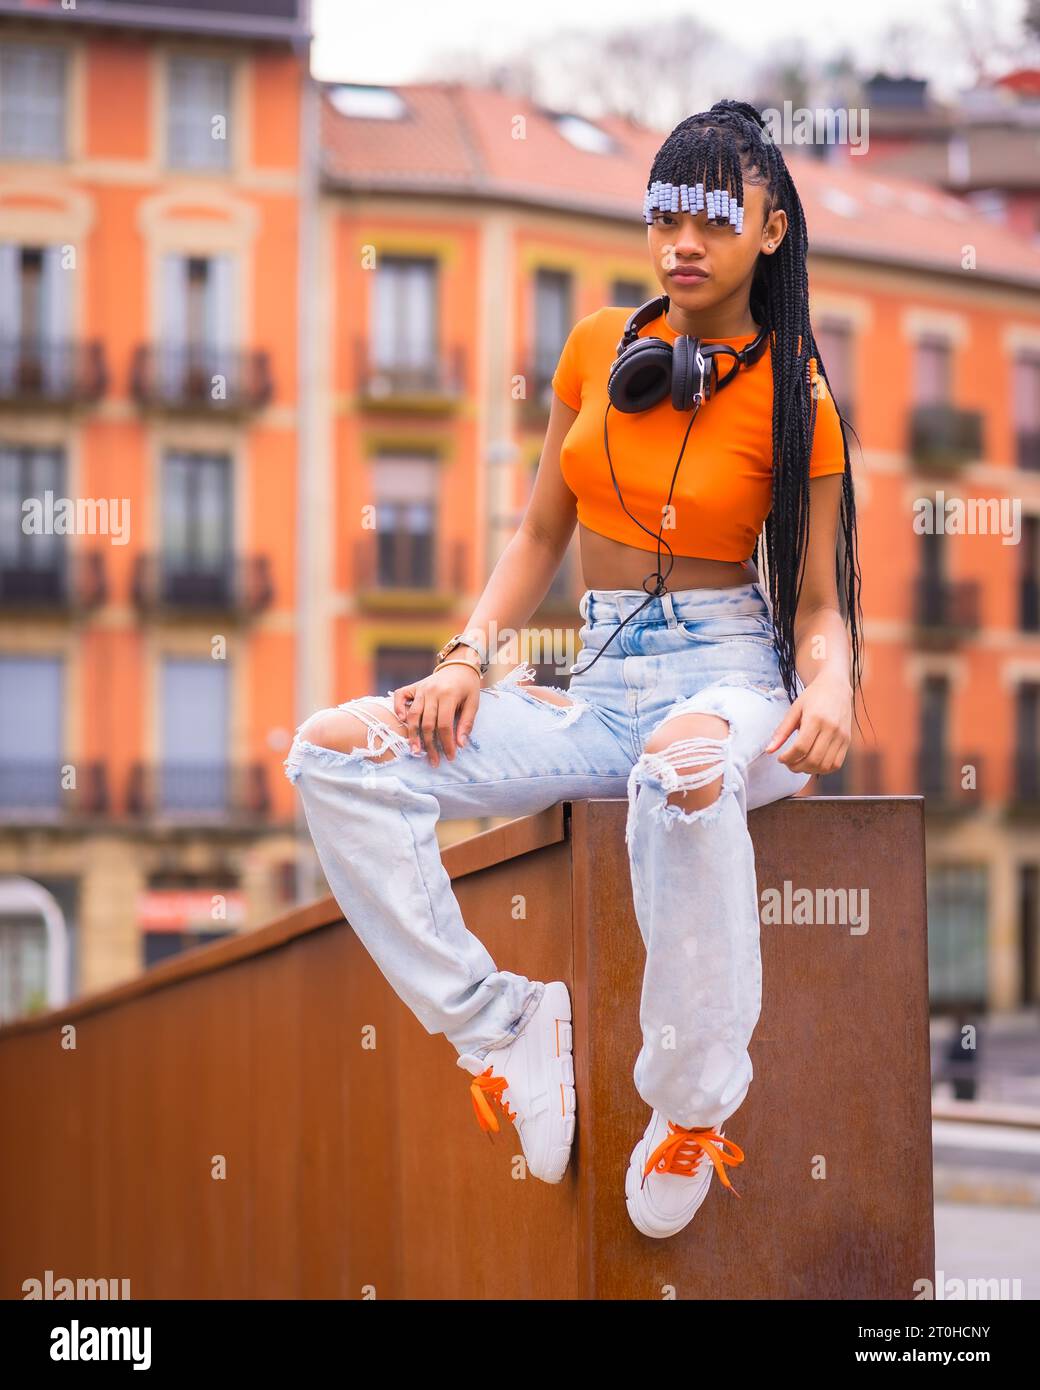 Lifestyle with a young trap dancer with braids. Black girl of African ethnic group with orange t-shirt and cowboy pants. With houses Stock Photo